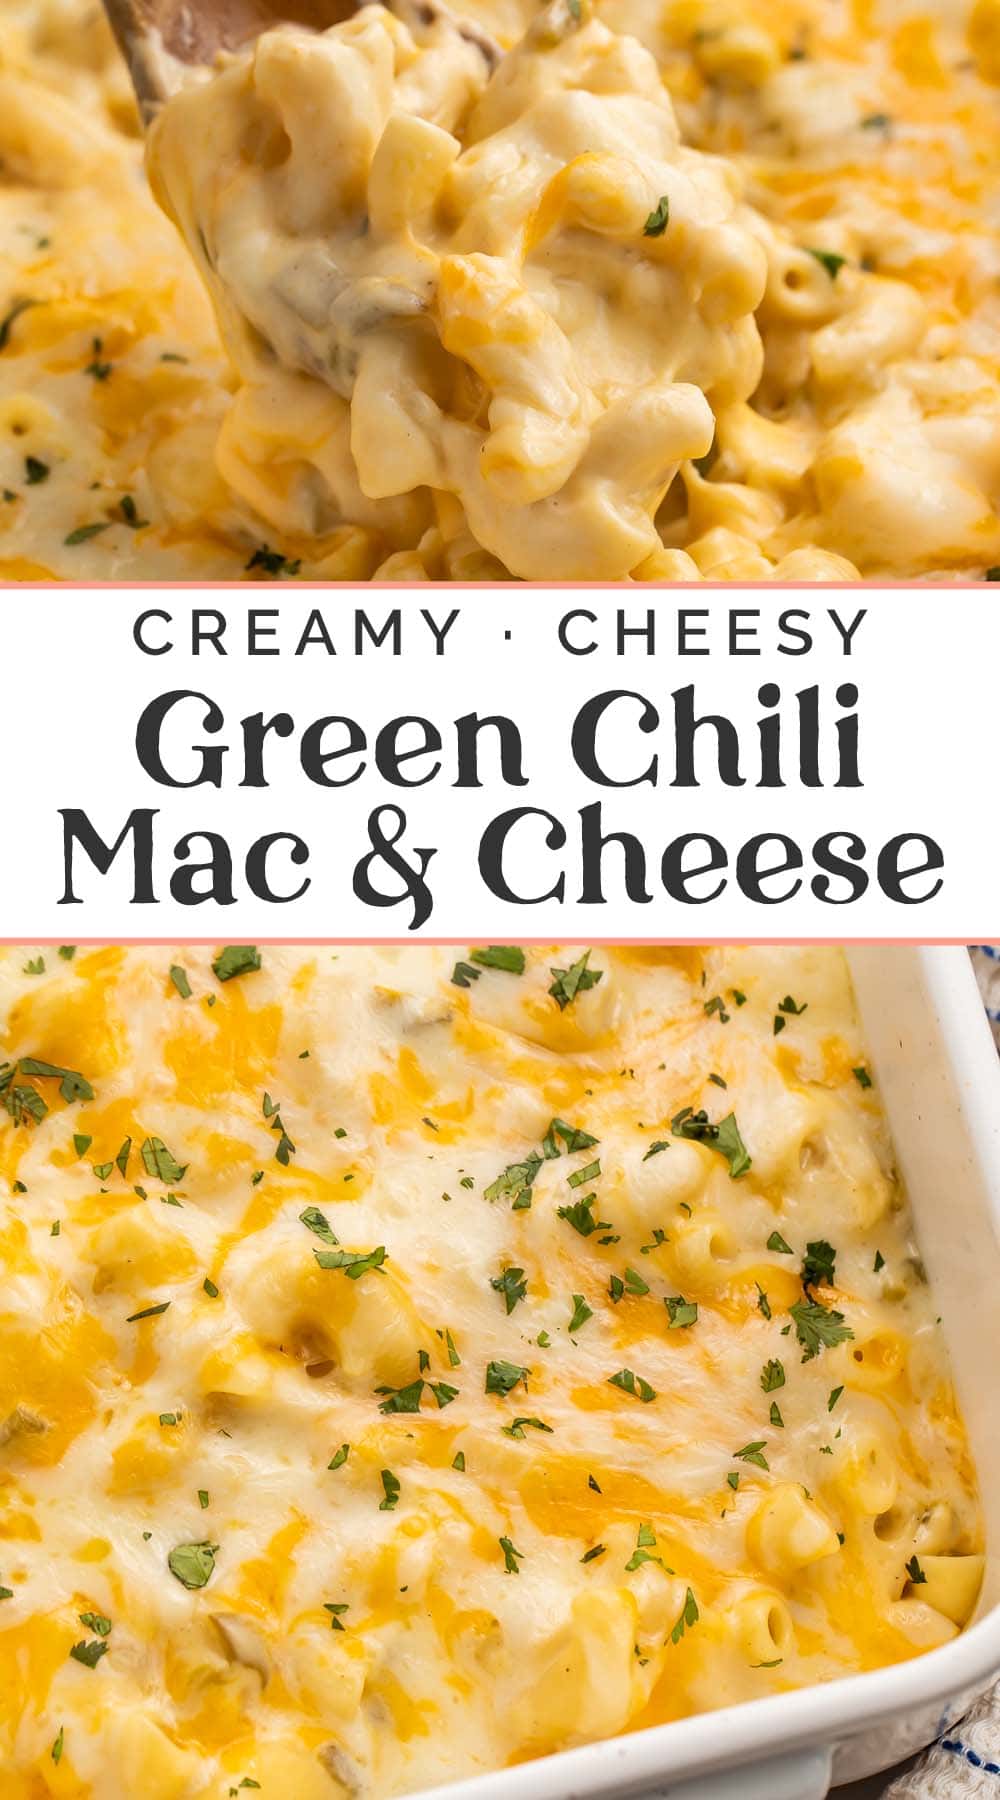 Pin graphic for green chili mac and cheese.